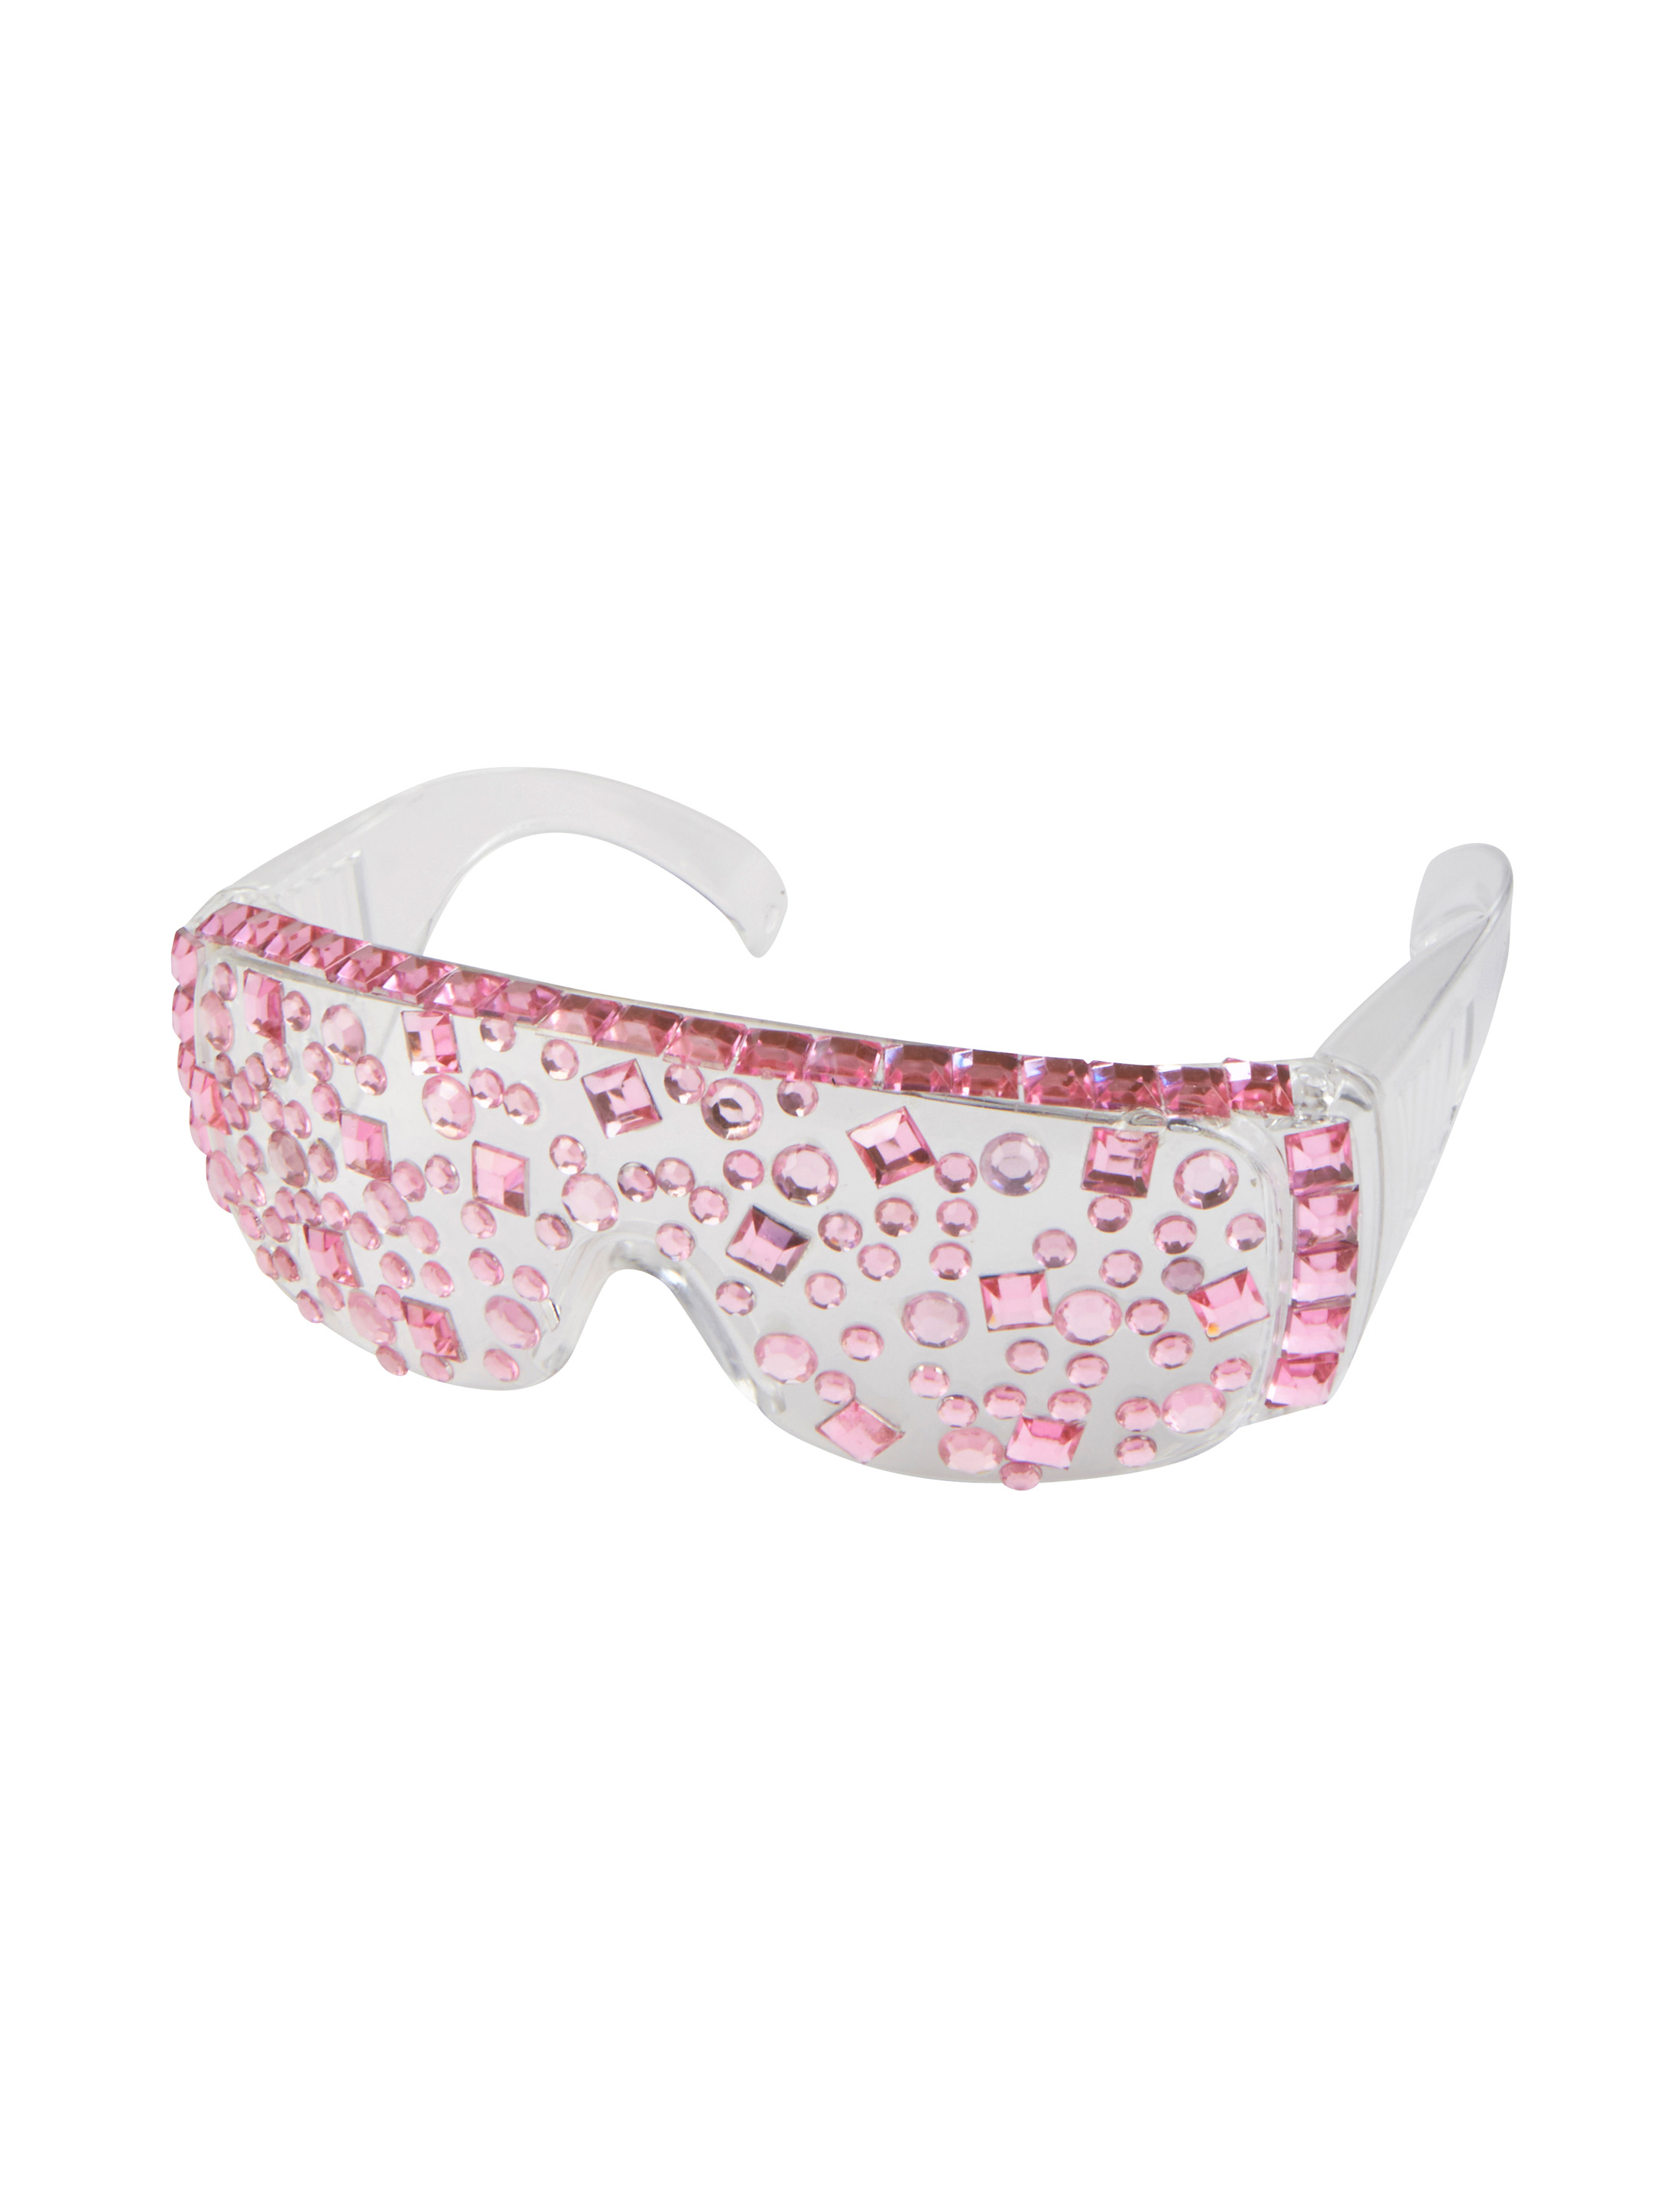 Brille Lady Lala pink